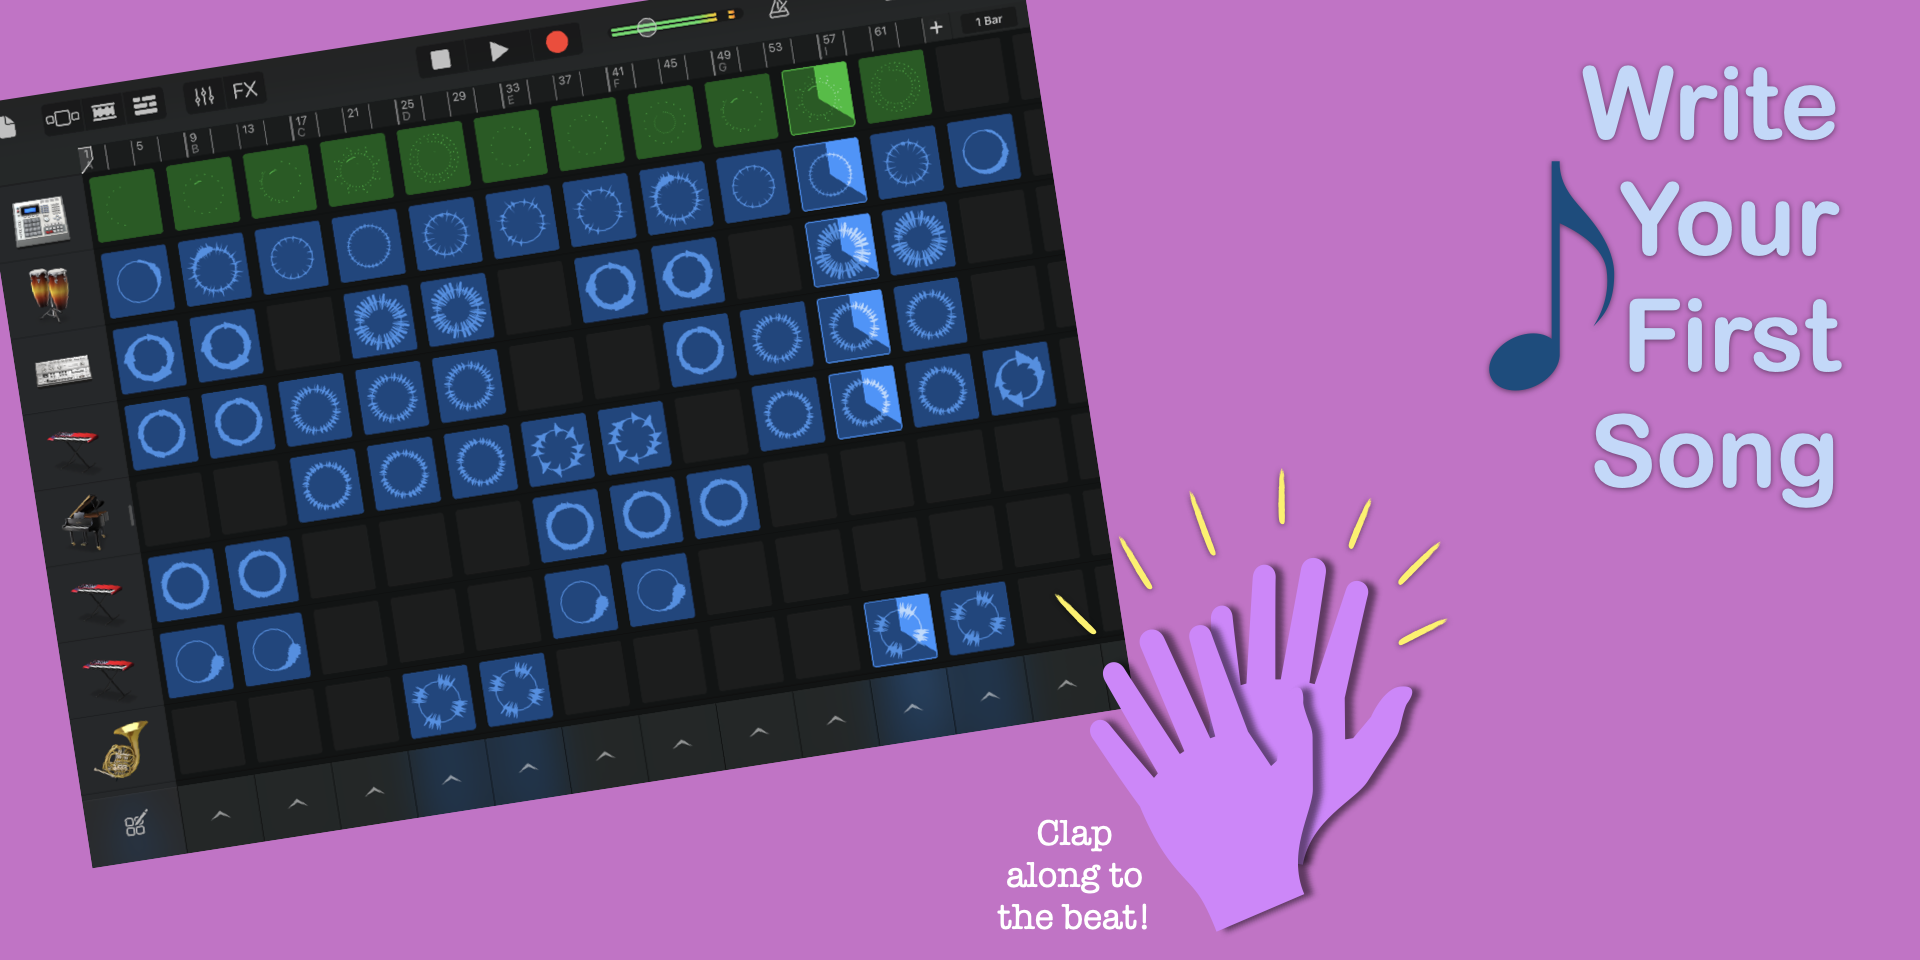 Write your first song. Clap along to the beat. iPad GarageBand.